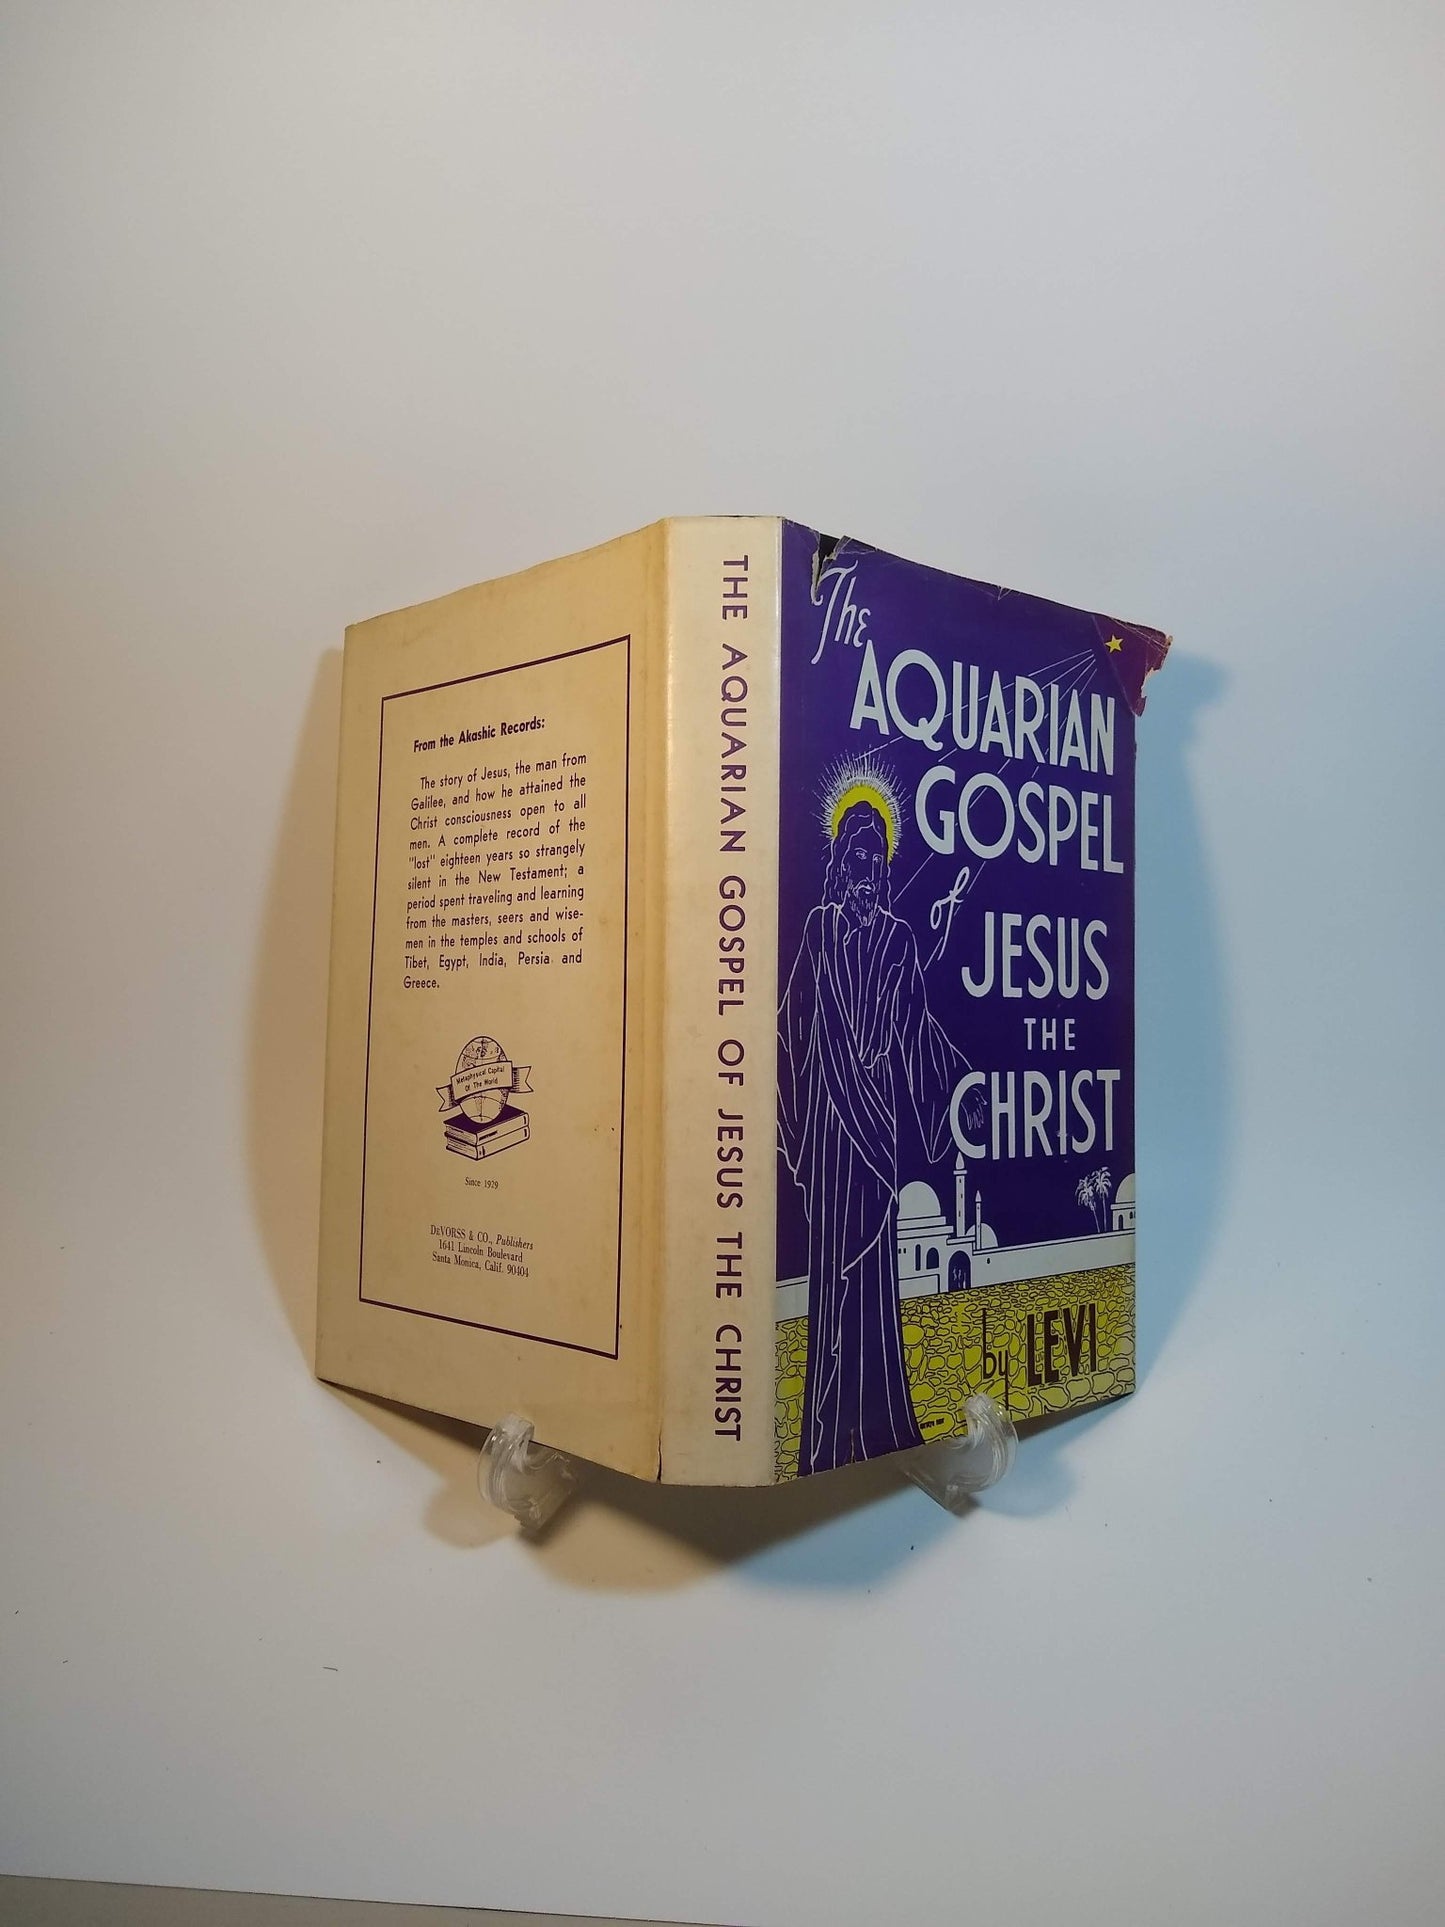 The Aquarian Gospel of Jesus the Christ - [ash-ling] Booksellers